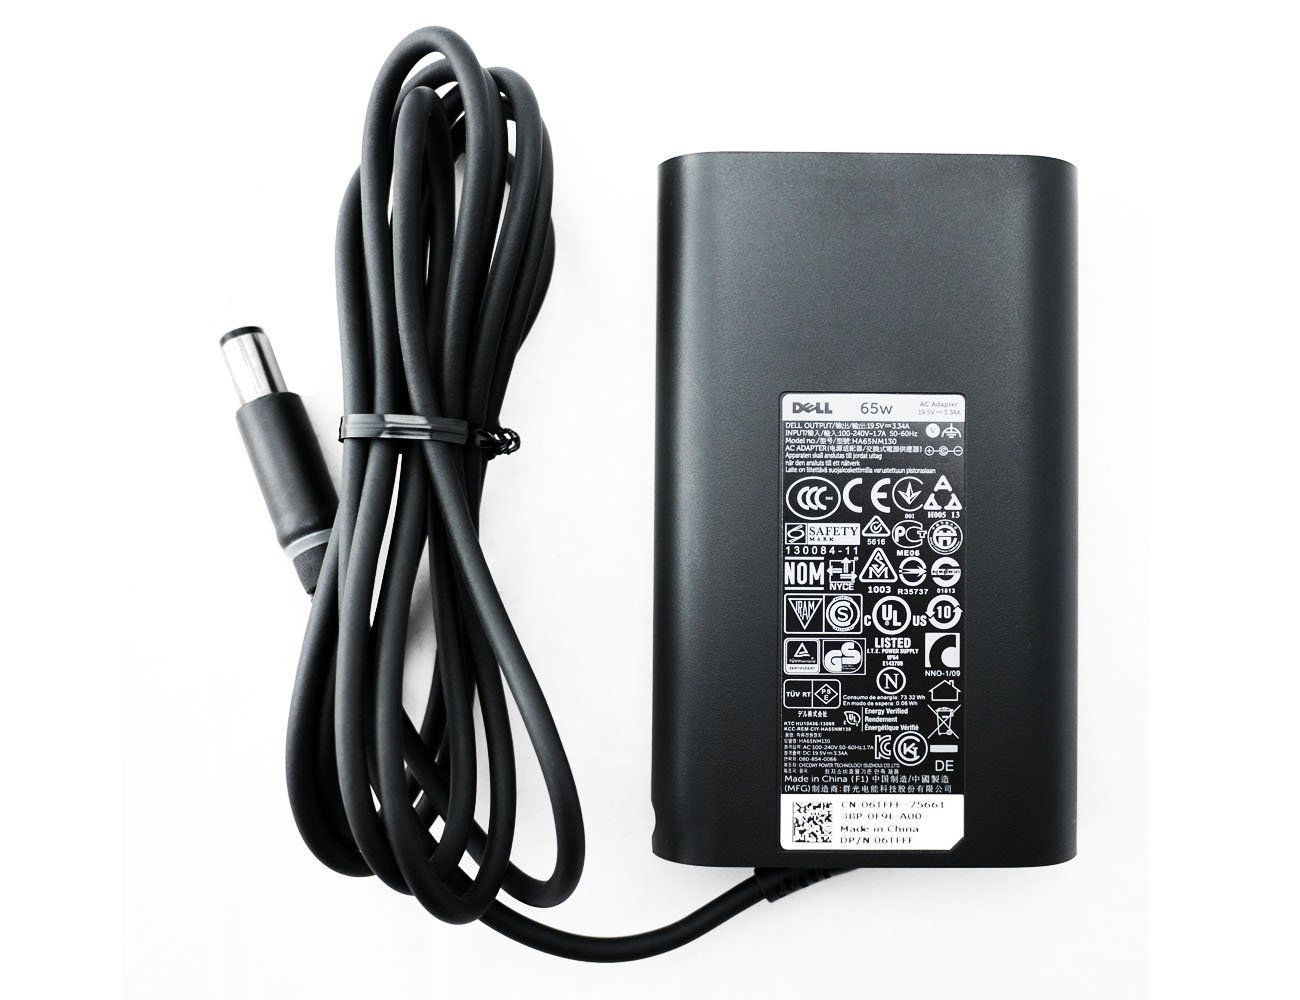 Slim 65W Dell Latitude E6440 10991 Charger AC Adapter Power Supply